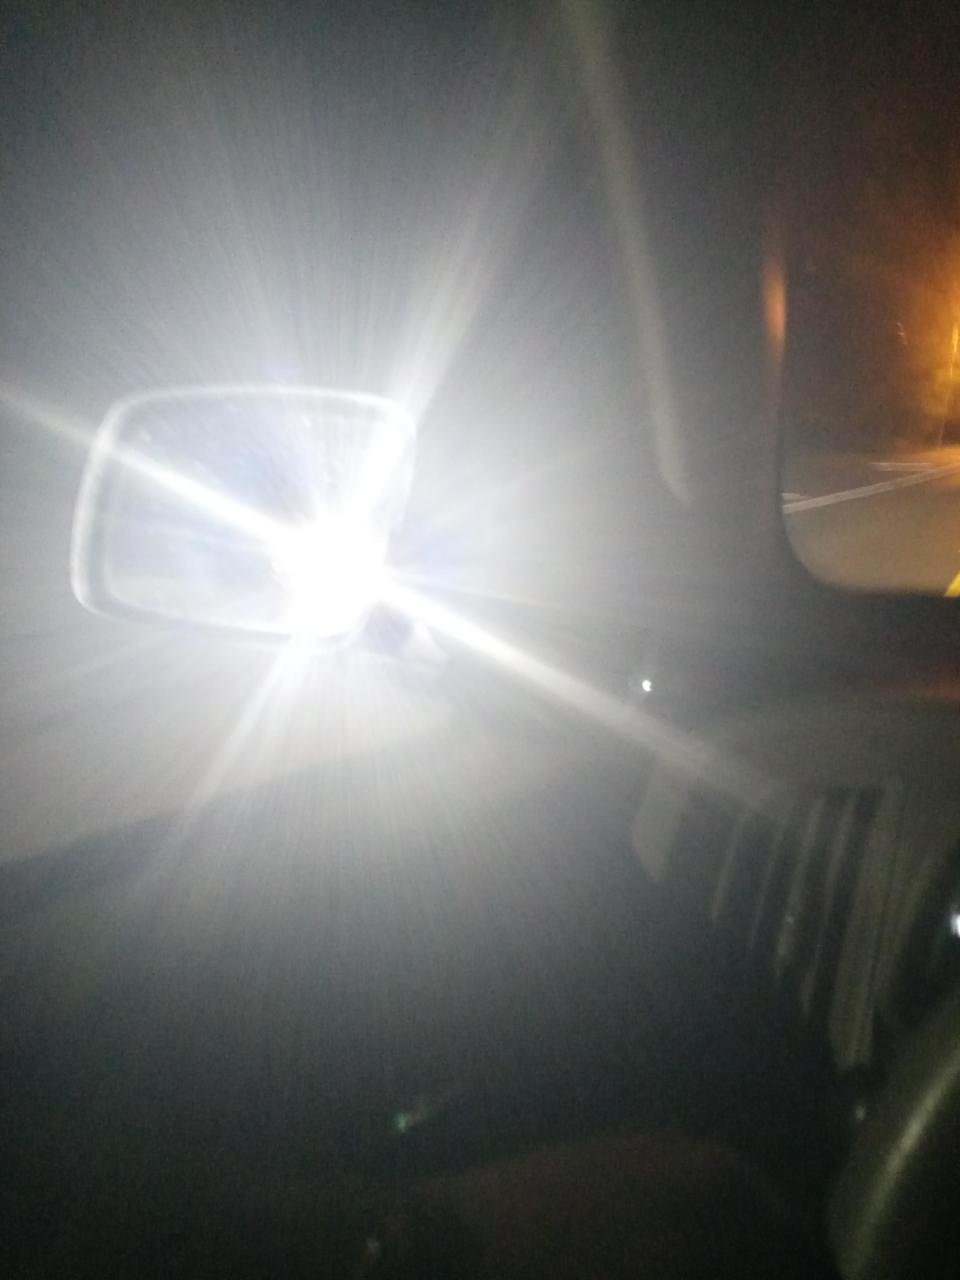 High beams on in someone's rearview mirror